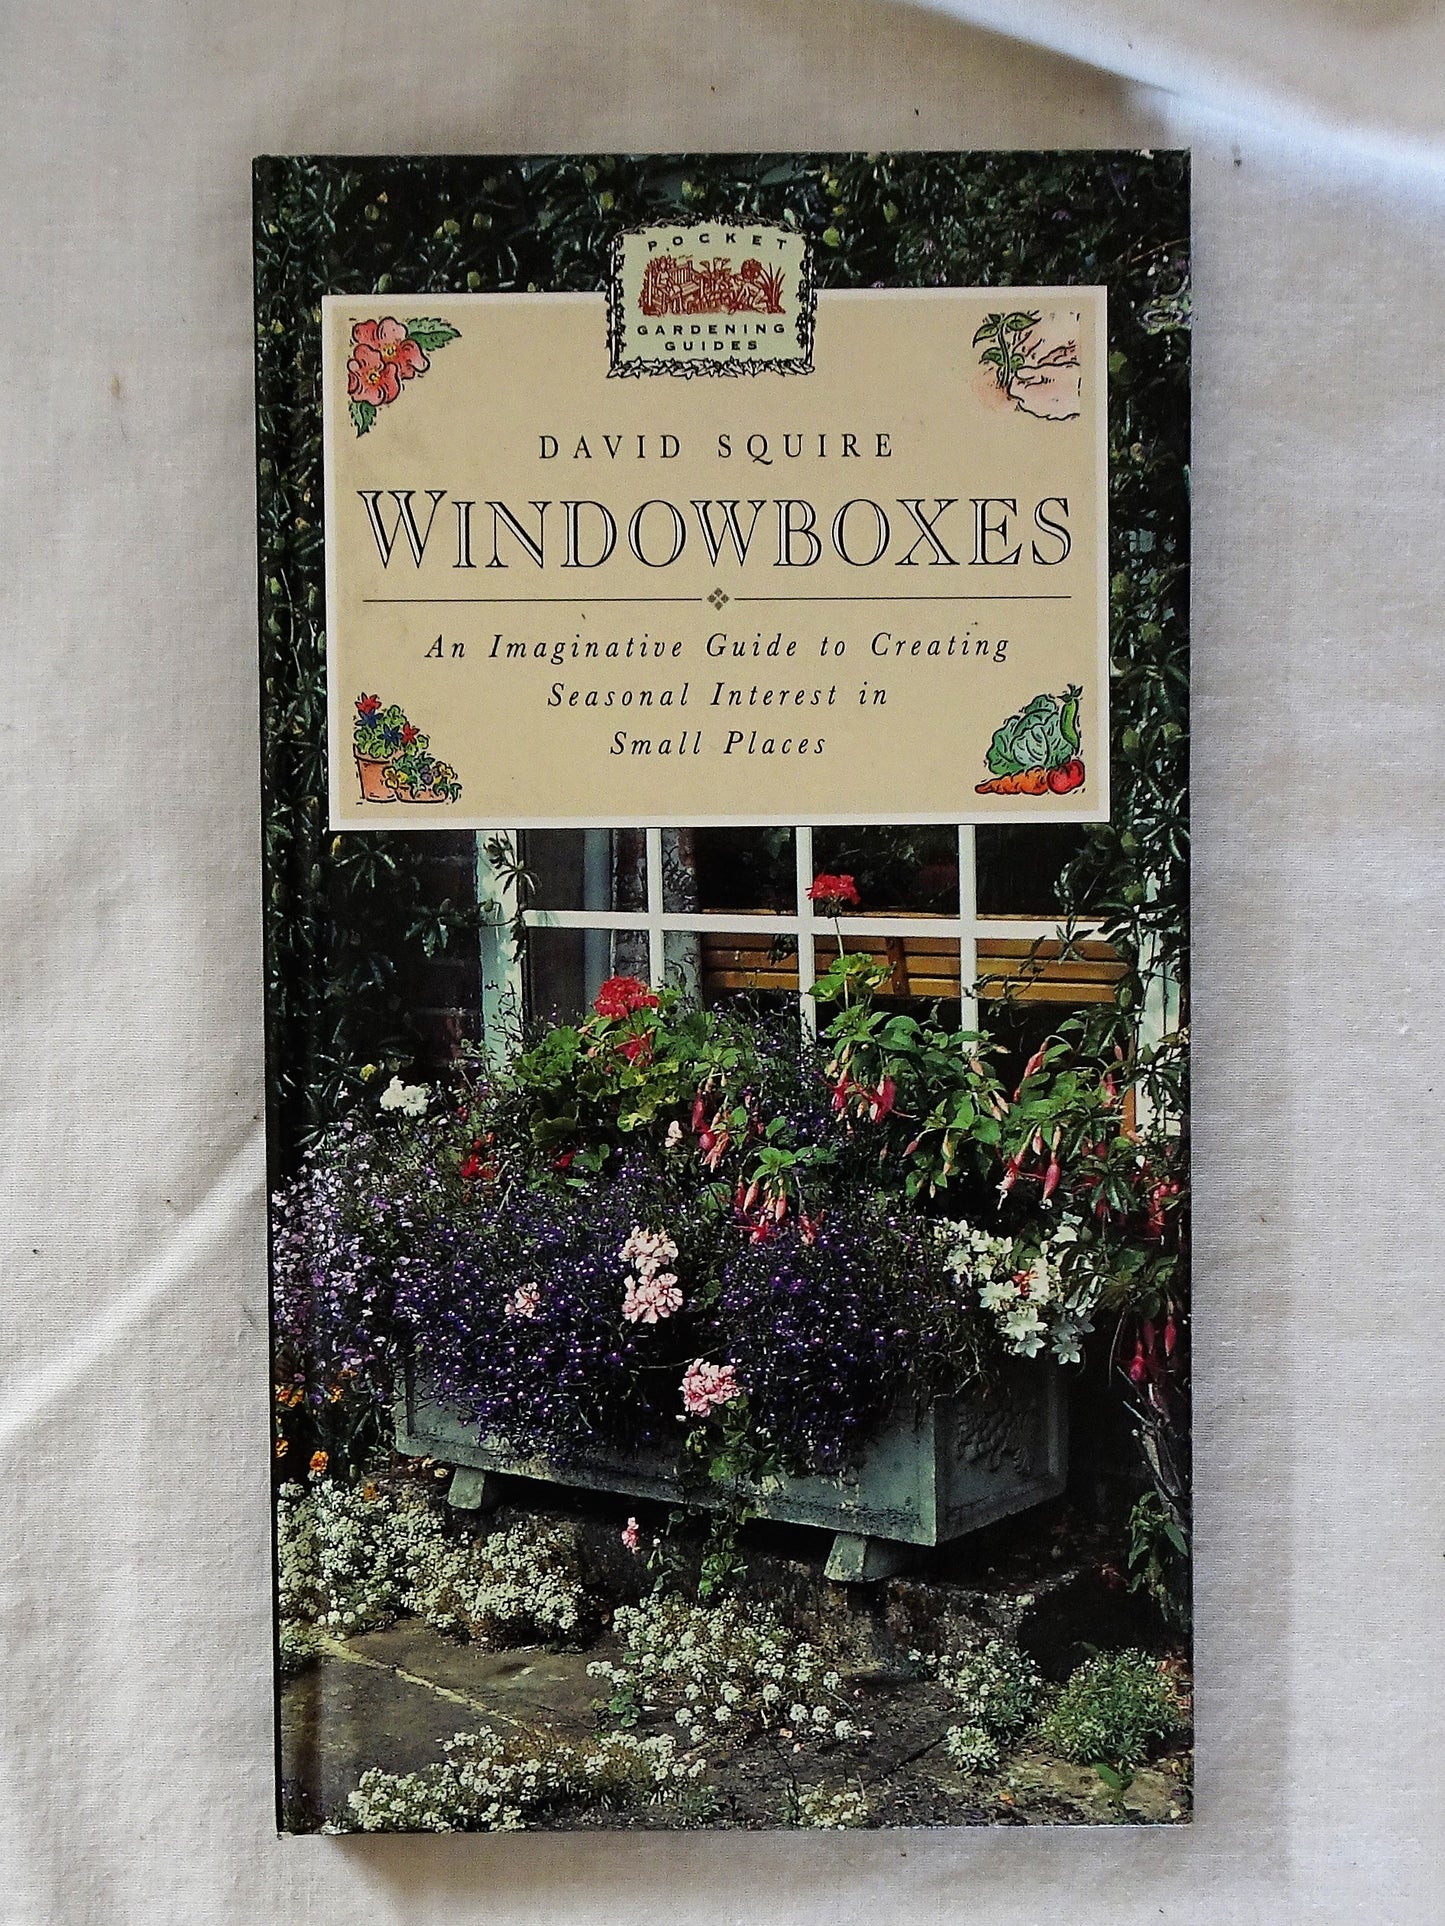 Windowboxes by David Squire